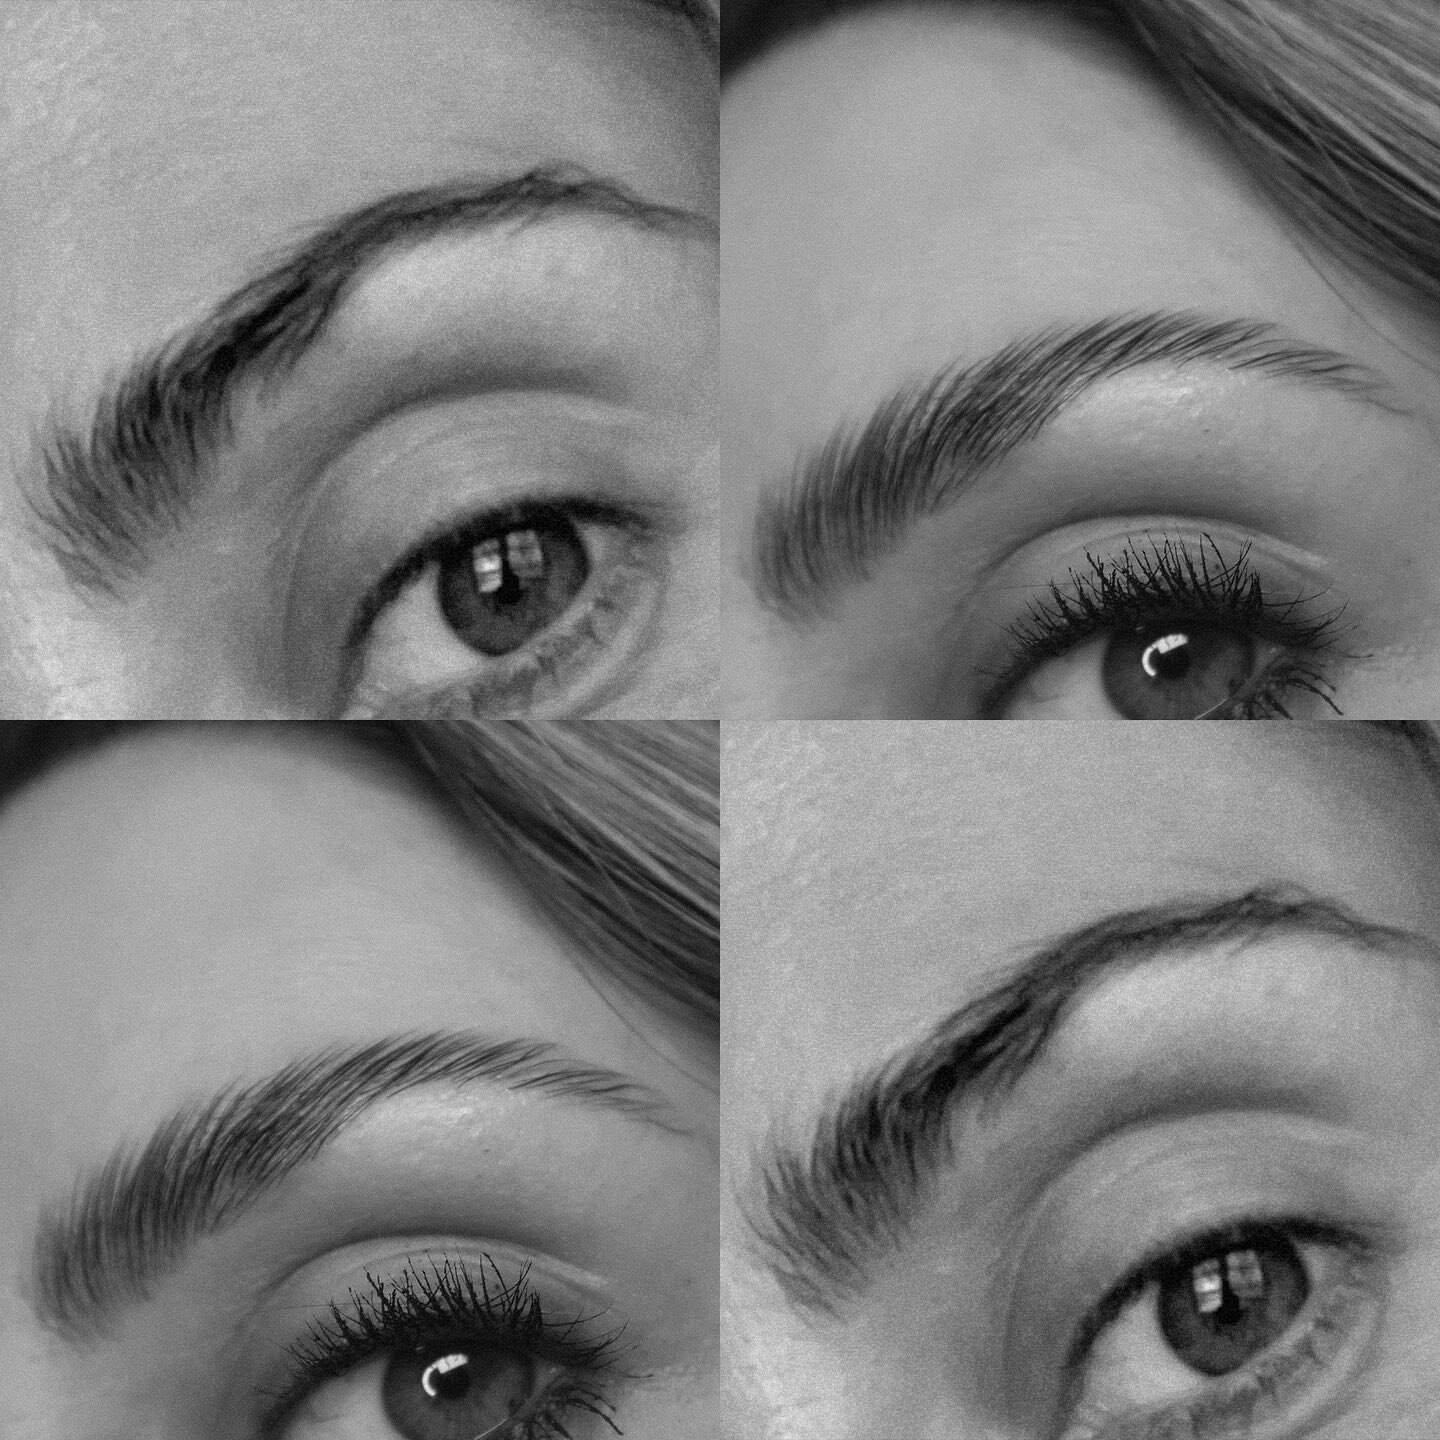 Laminated brows. Swipe for before and after&hellip;. 

Would you?? 

@lacqueredandstripped @zaskhia_beautyque 

#brows #browsonfleek #browgoals #browlamination #laminatingbrows #veganbeautytreatments #veganbeauty #crueltyfreebeauty #vegan